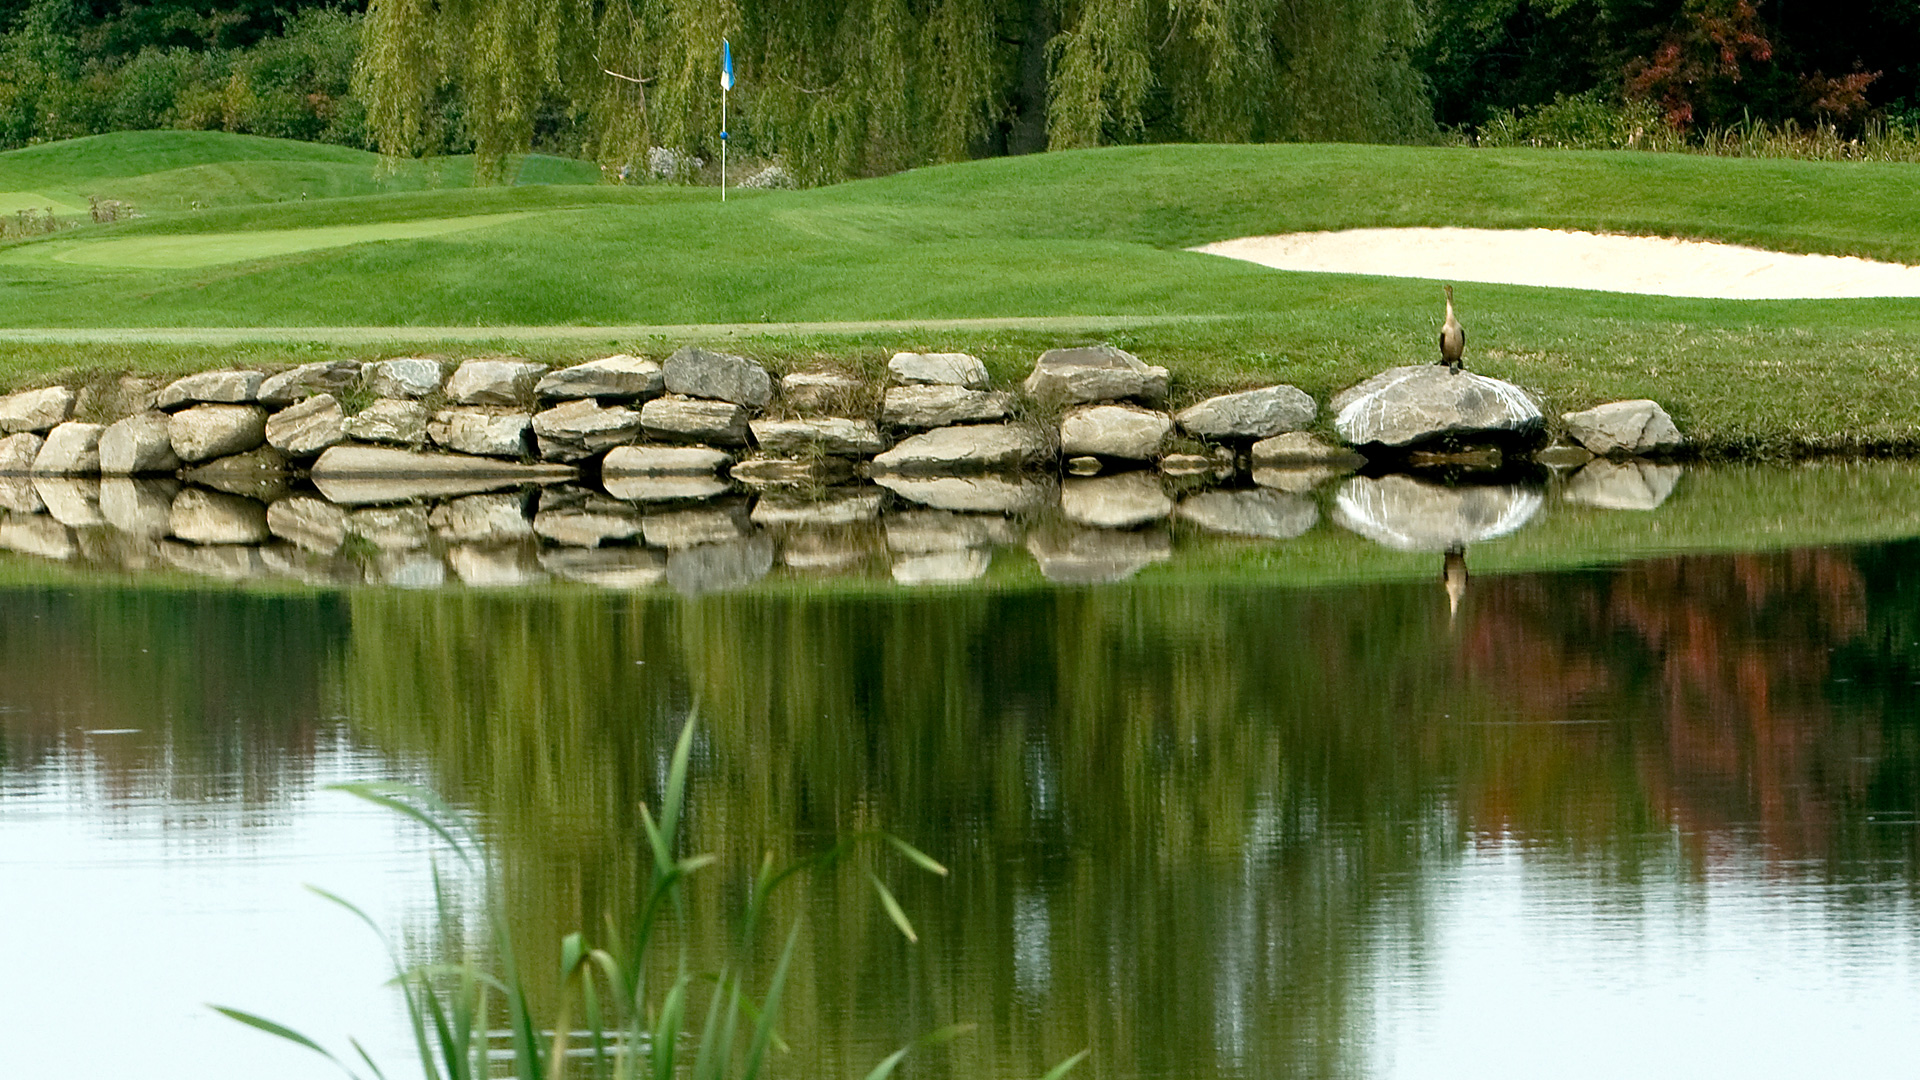 Merrimack golf club with water and rocks and bird